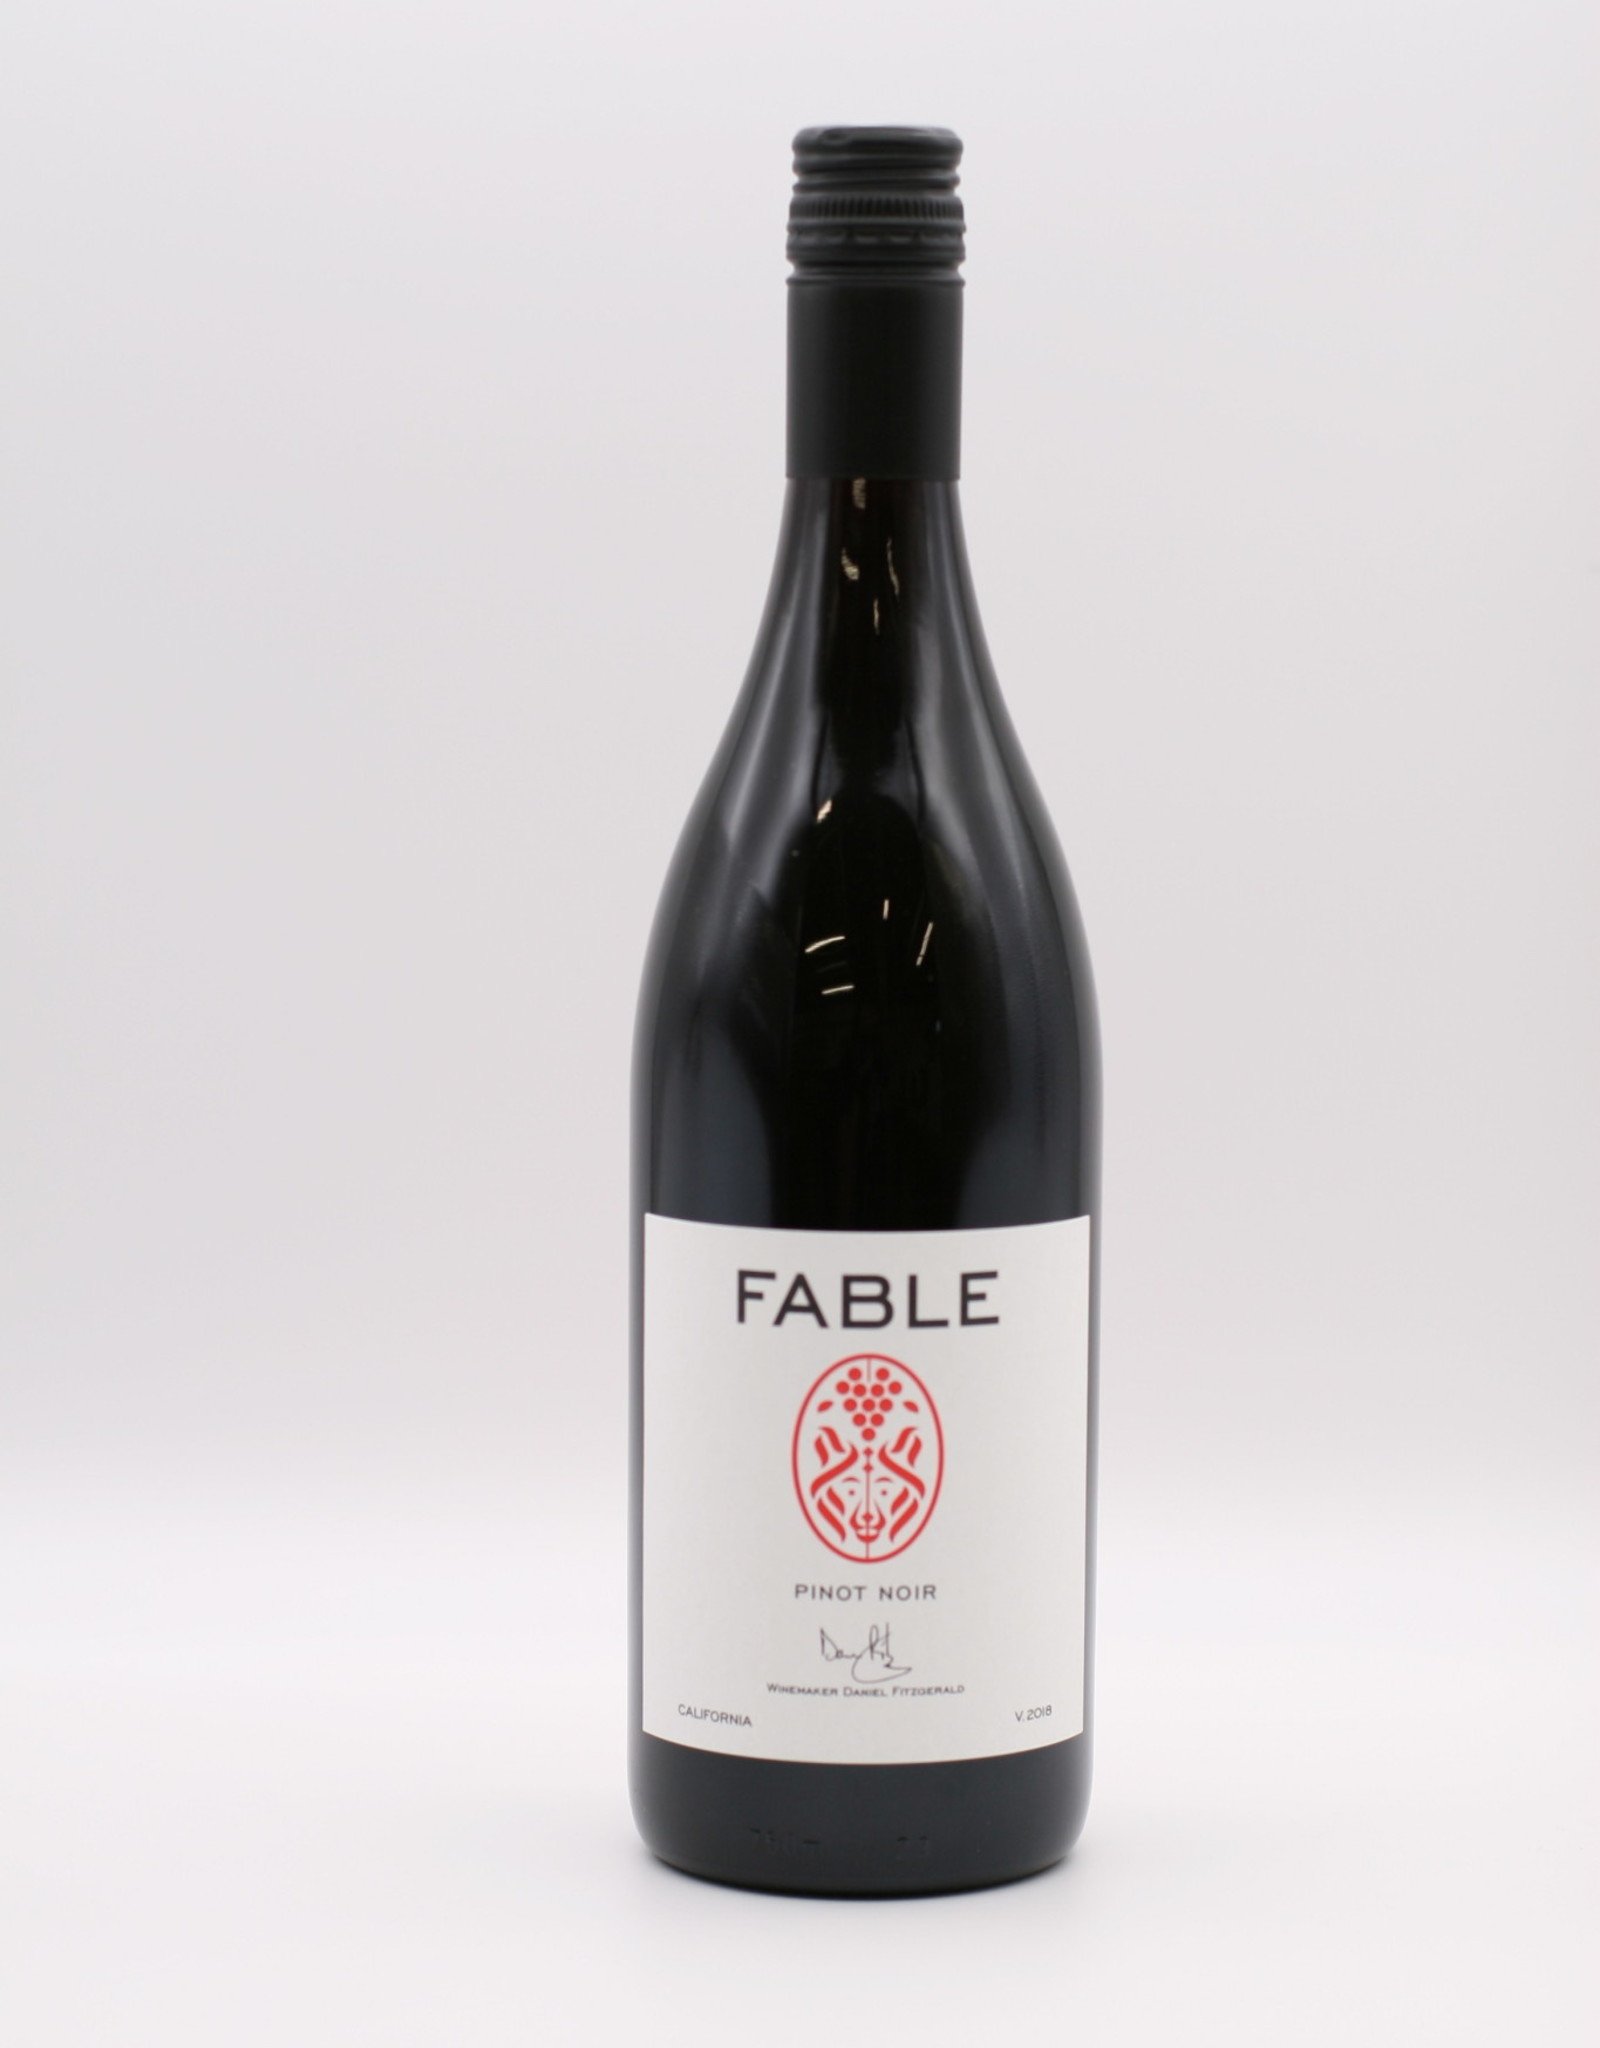 Fable Pinot Noir